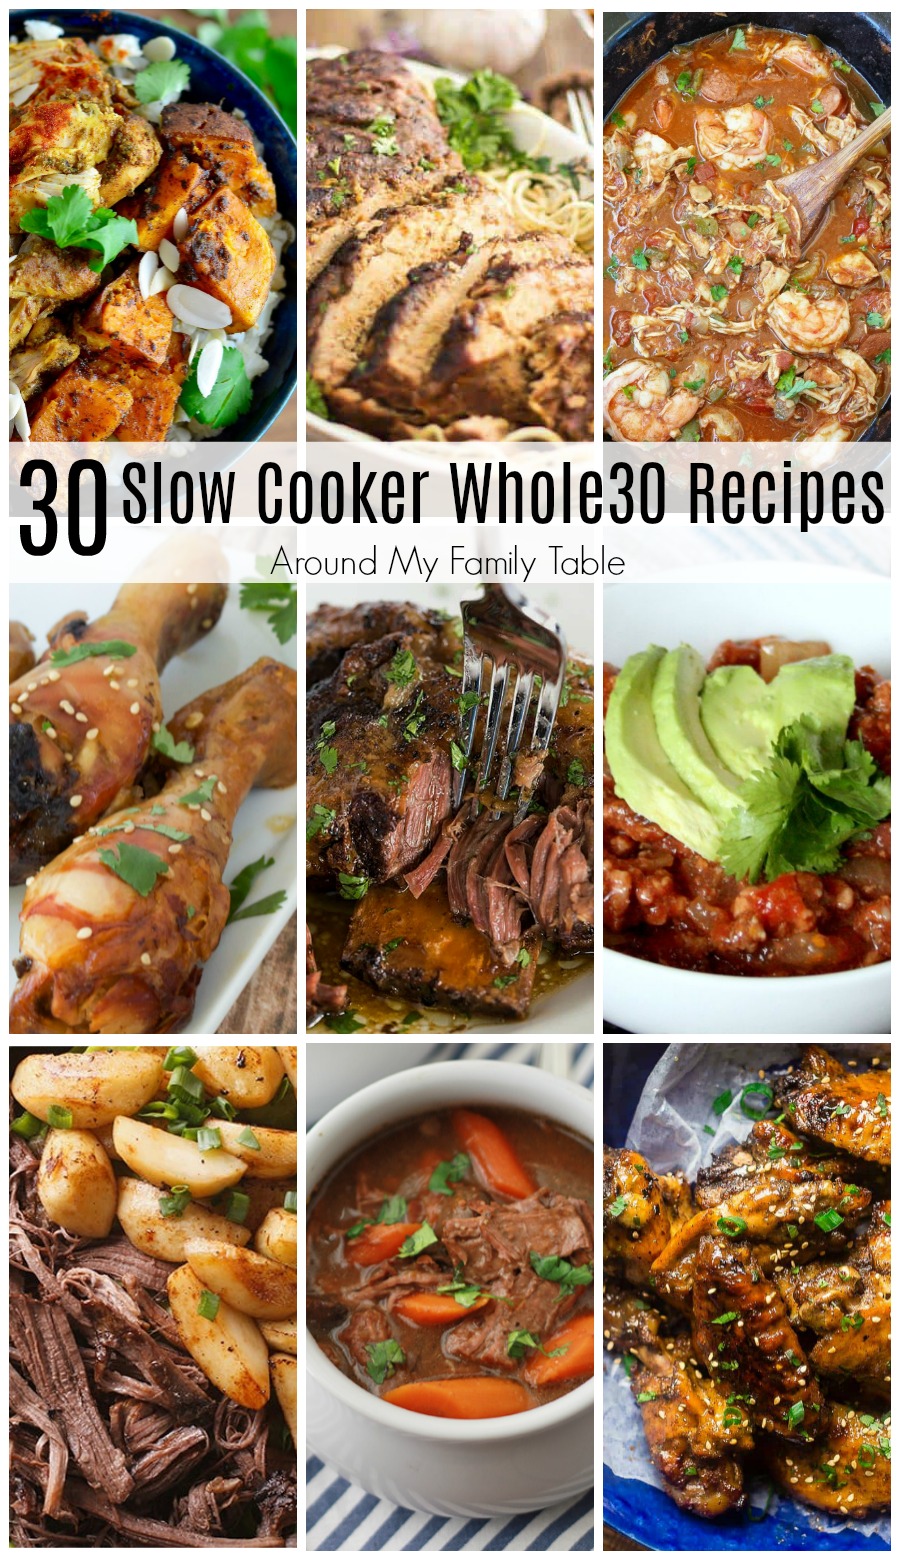 https://www.aroundmyfamilytable.com/wp-content/uploads/2018/12/Whole30-Slow-Cooker-Recipes.jpg